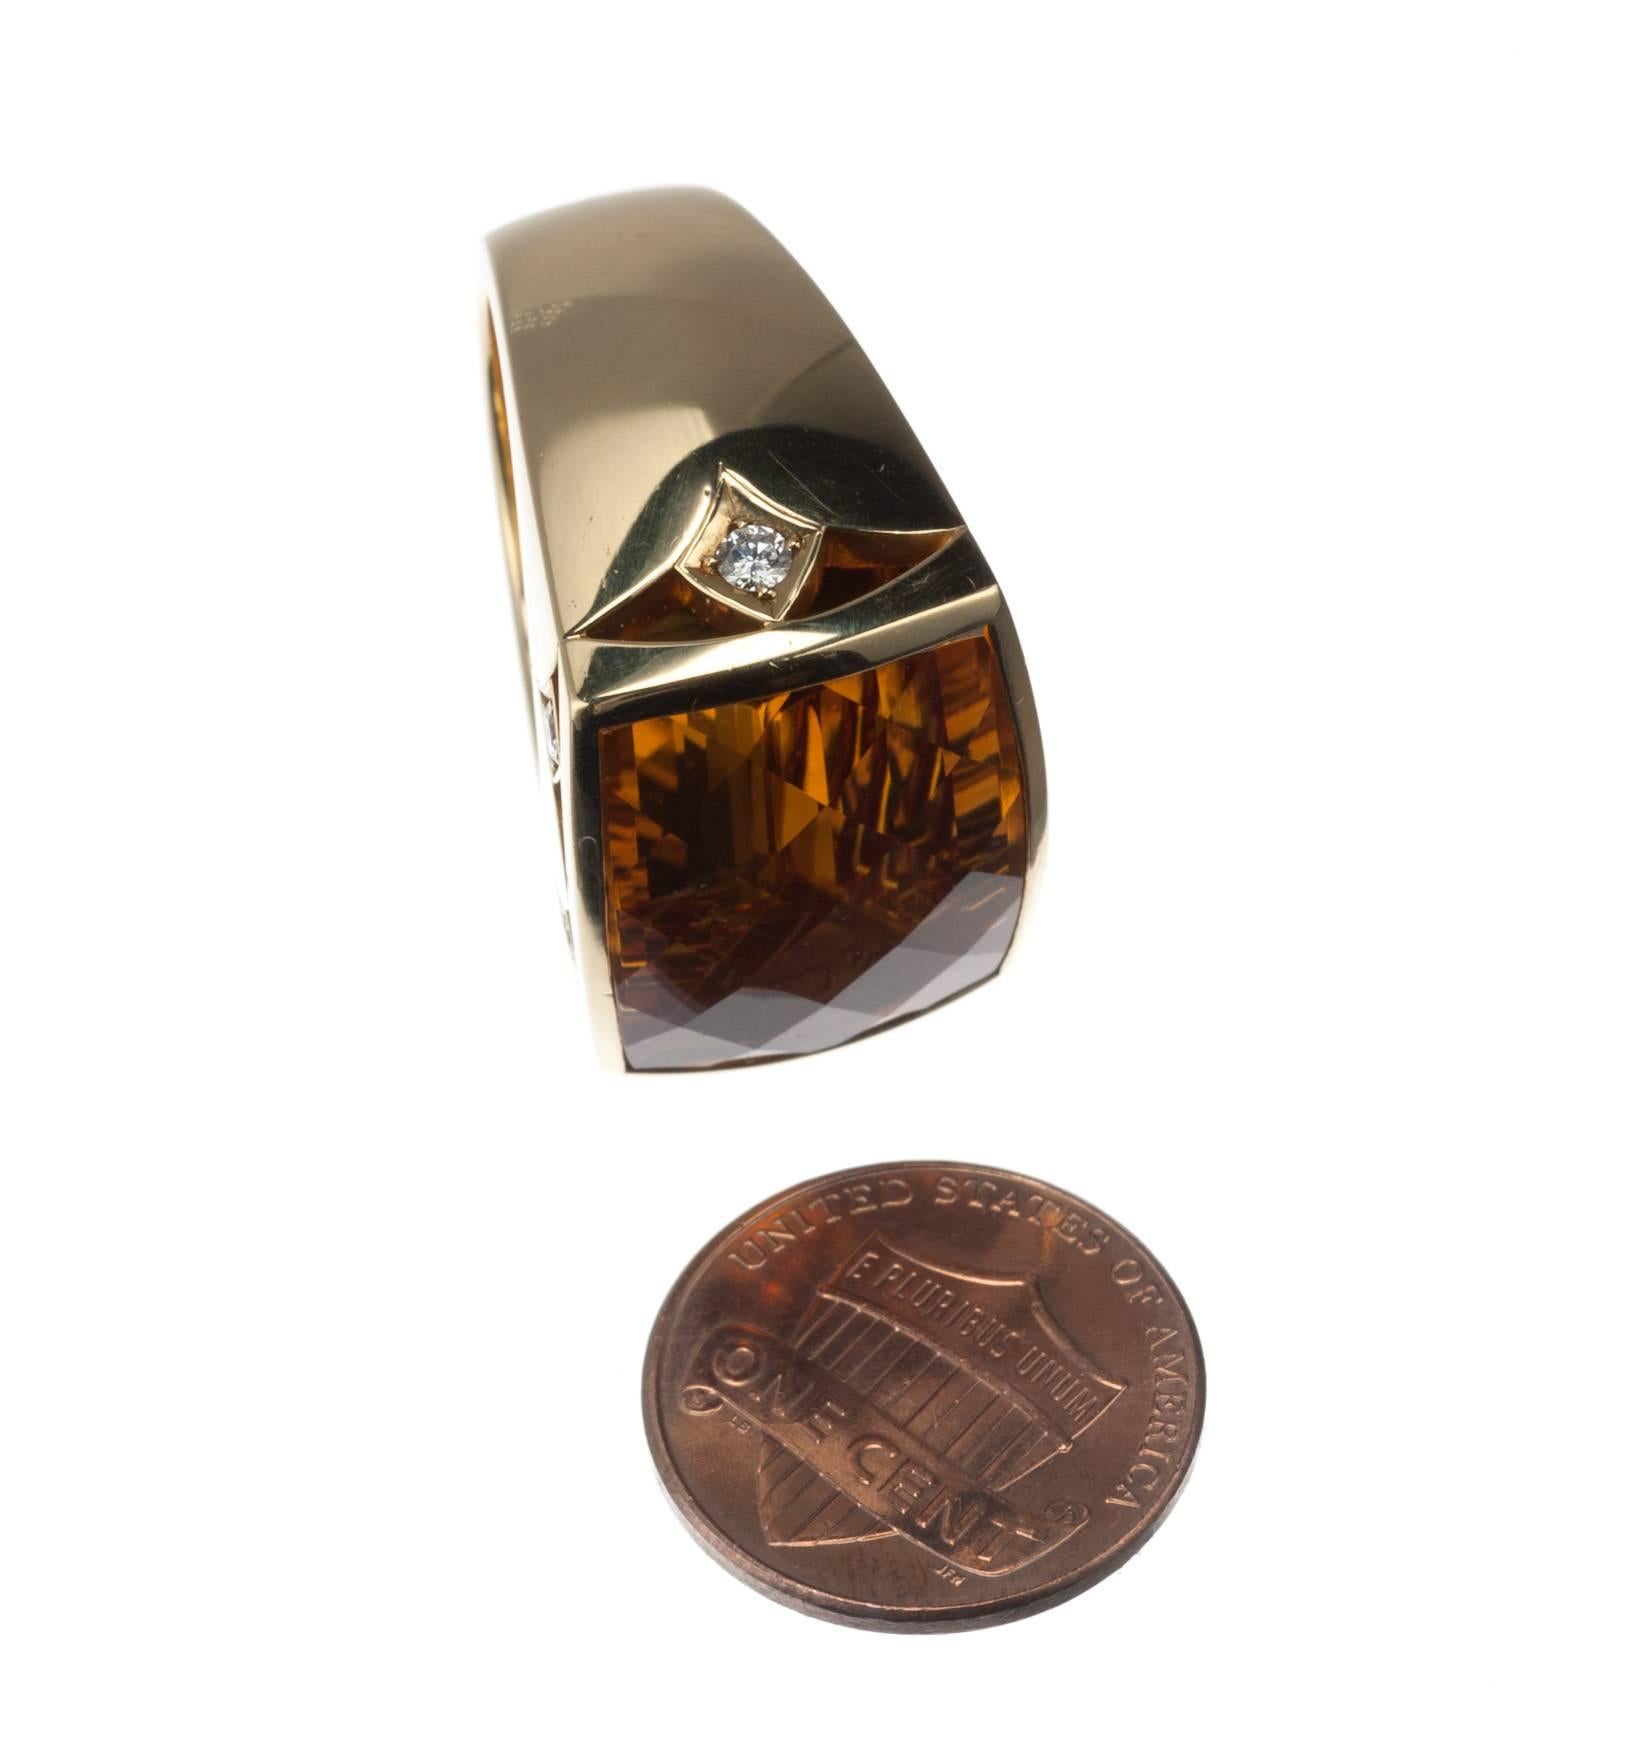 Crafted with the bold showmanship designer Stephen Webster is known for, this ring features a remarkable rectangular checkerboard-cut citrine, 16x20mm, set in a solid 18-karat yellow gold mounting accented with subtle arches set with 6 brilliant-cut